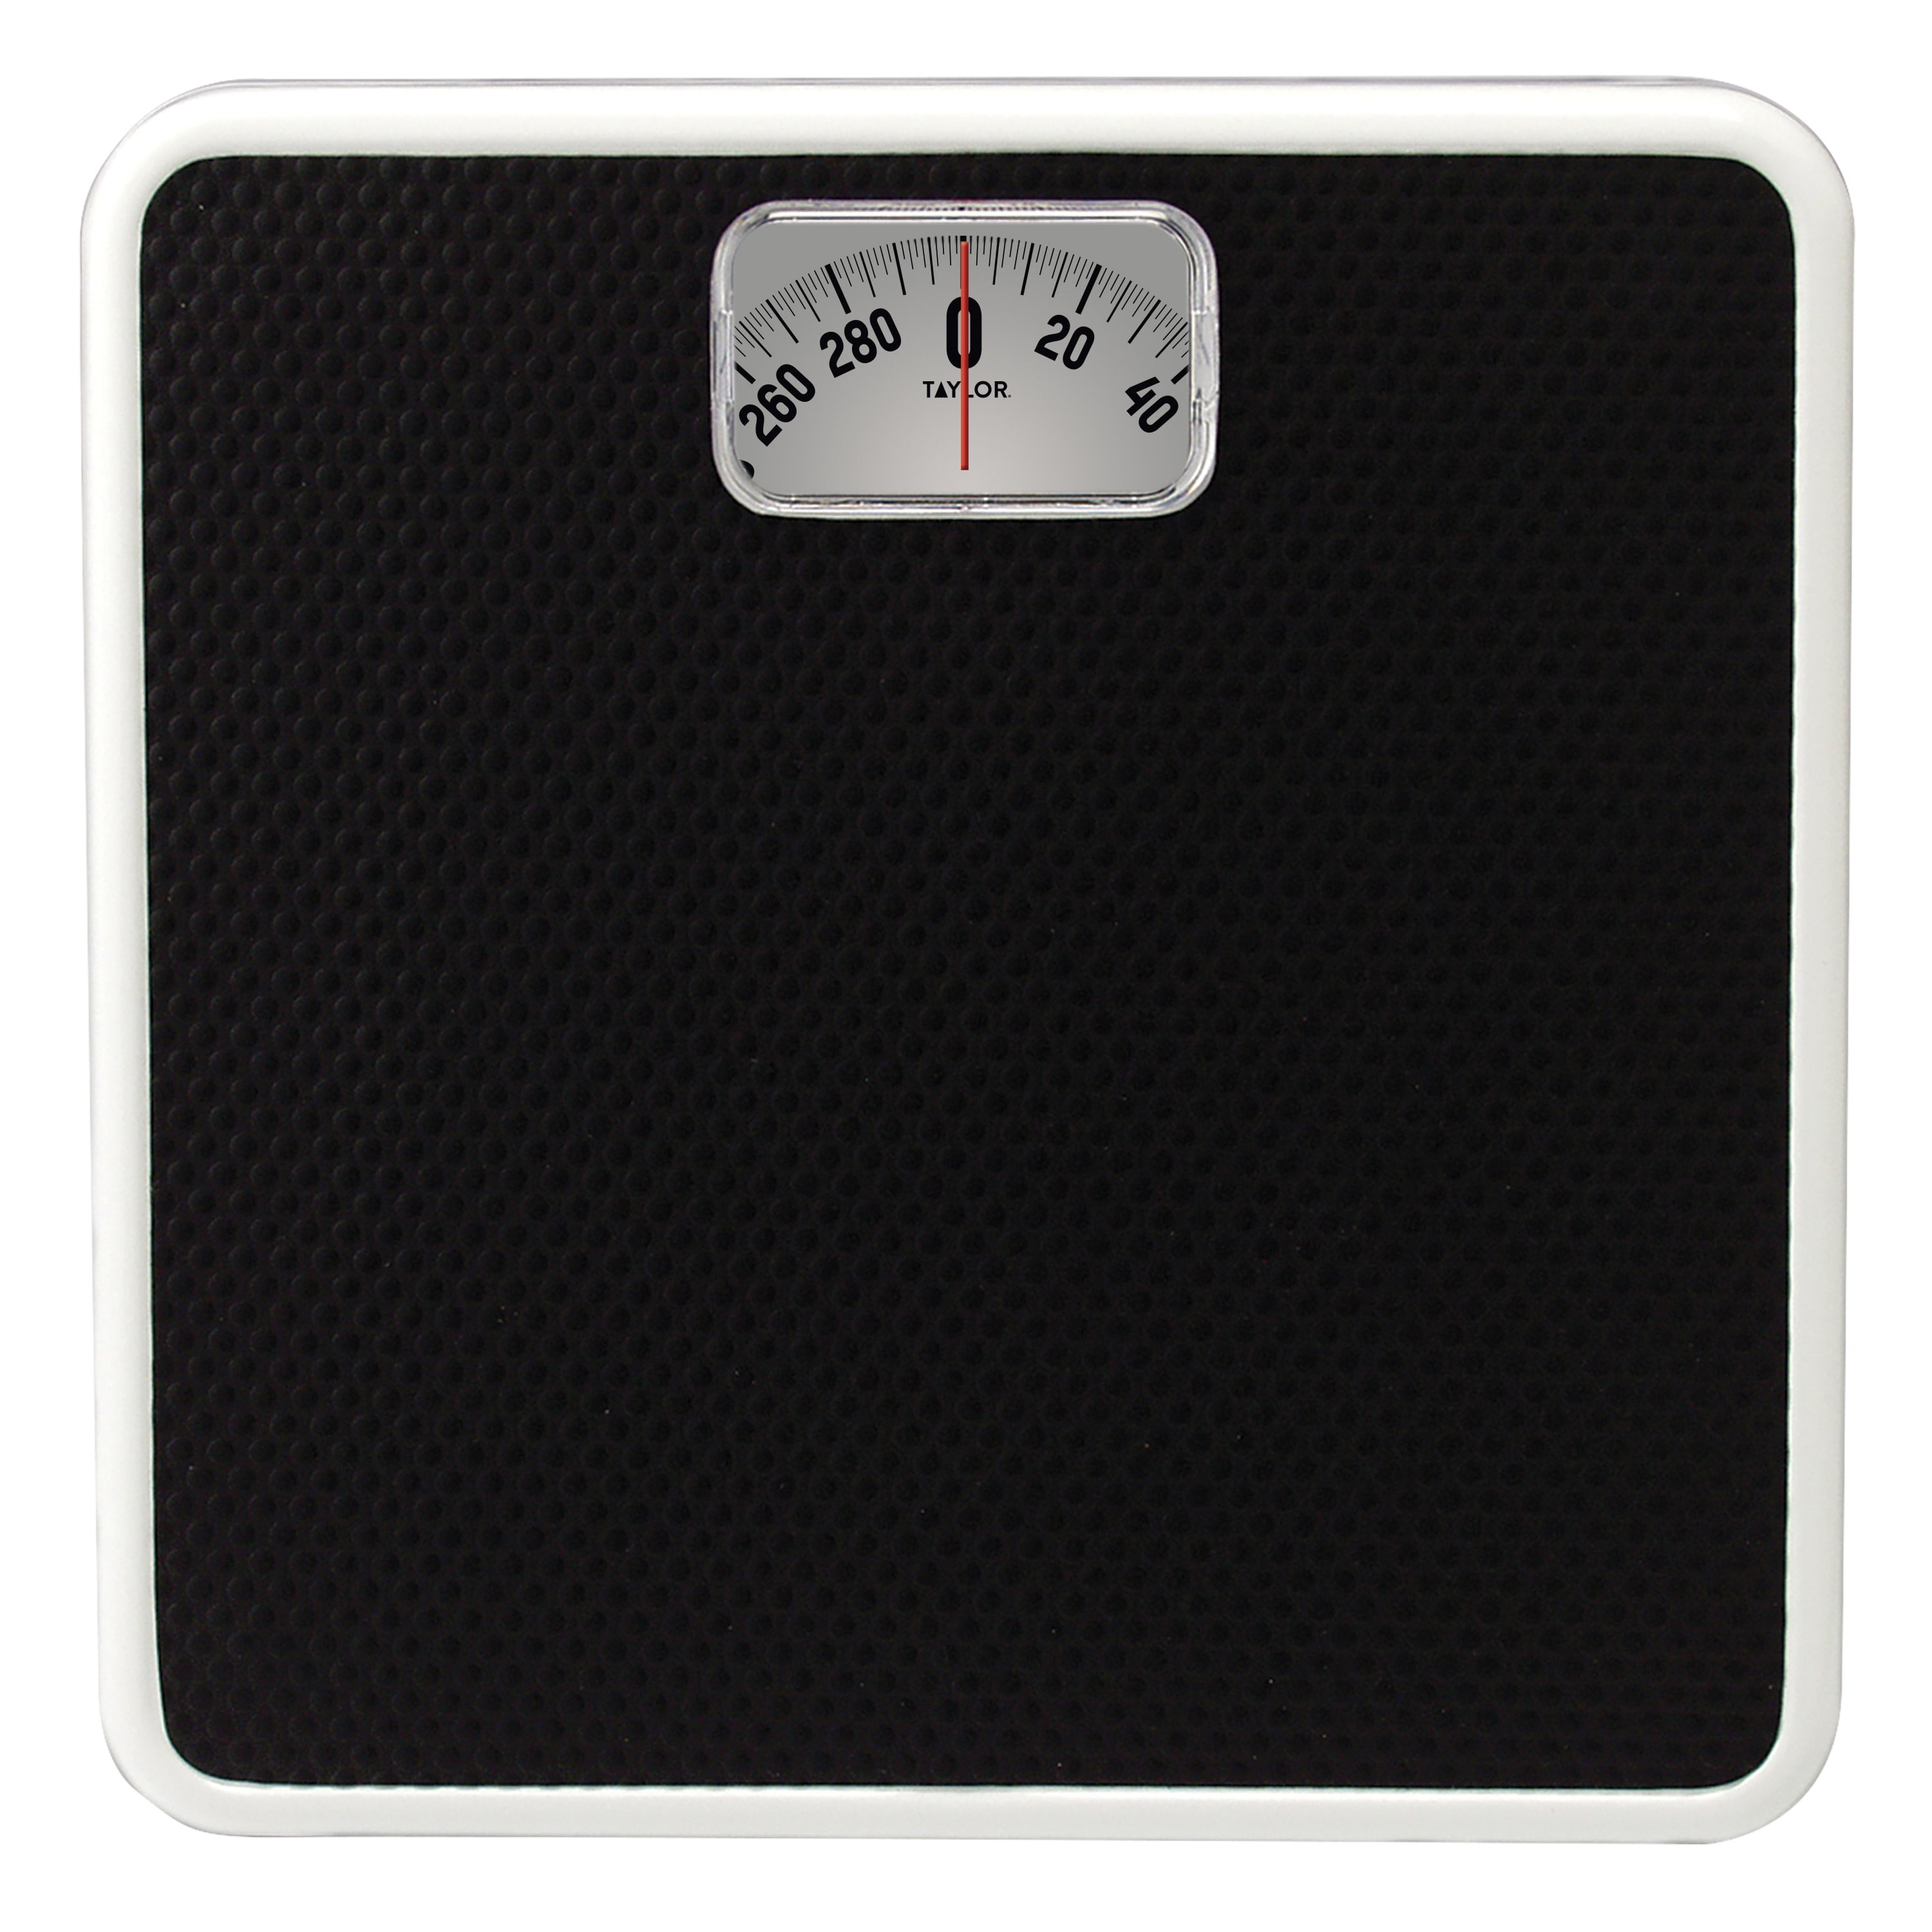 Mechanical Bathroom Scale analog measuring personal body weighing